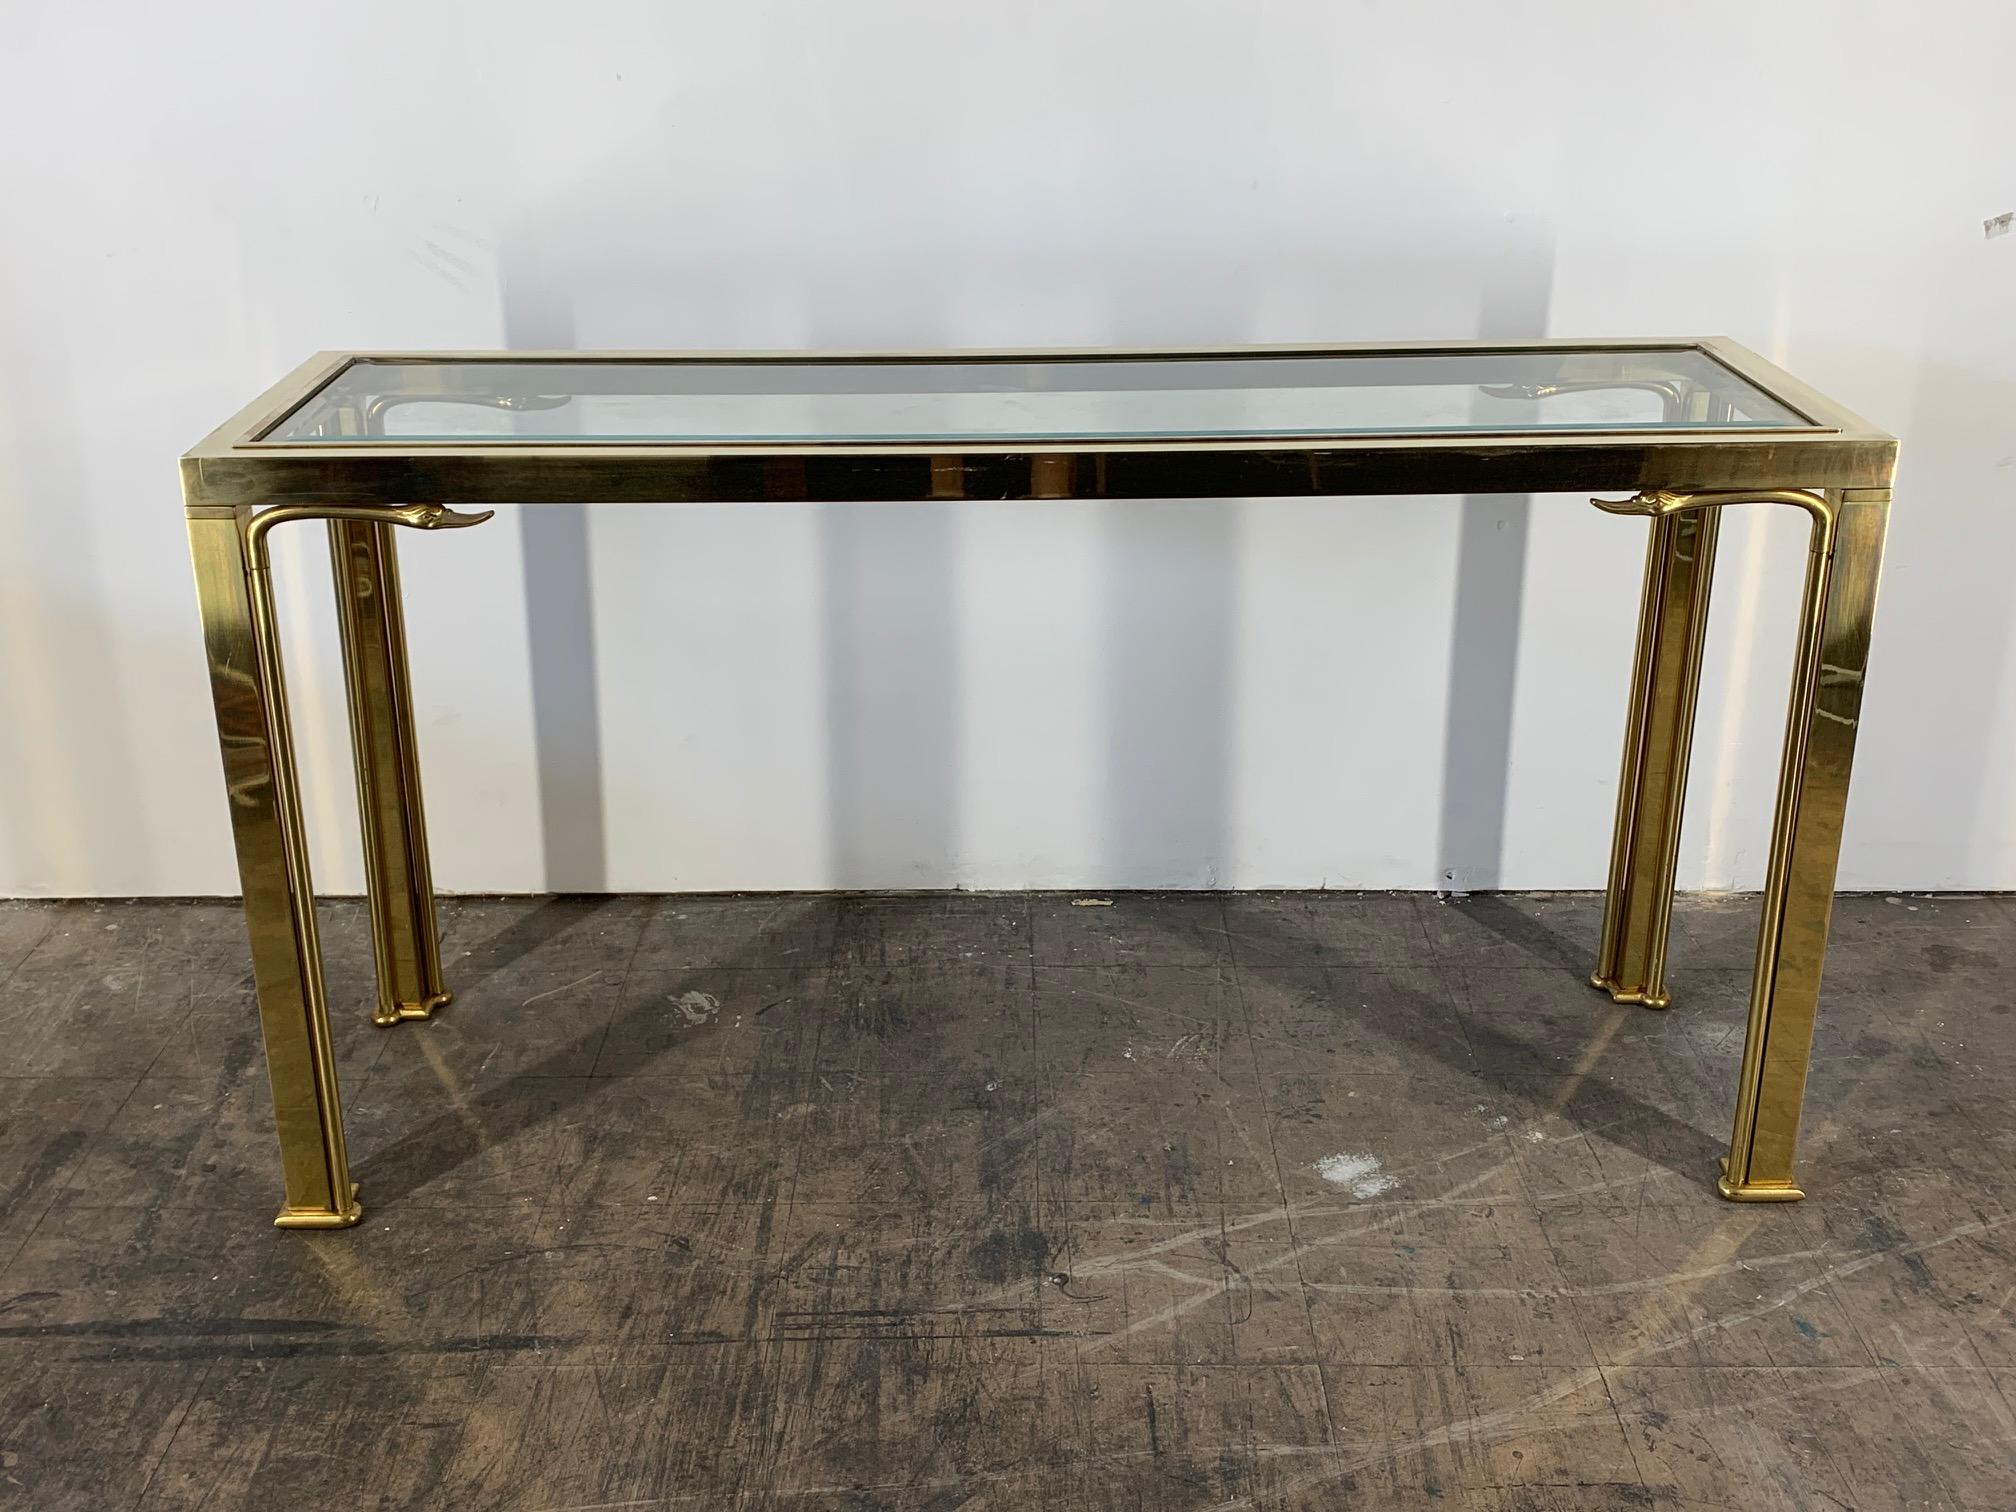 Brass console table by Mastercraft features swan head motif and bevelled glass top. Good vintage condition with wear consistent with age.